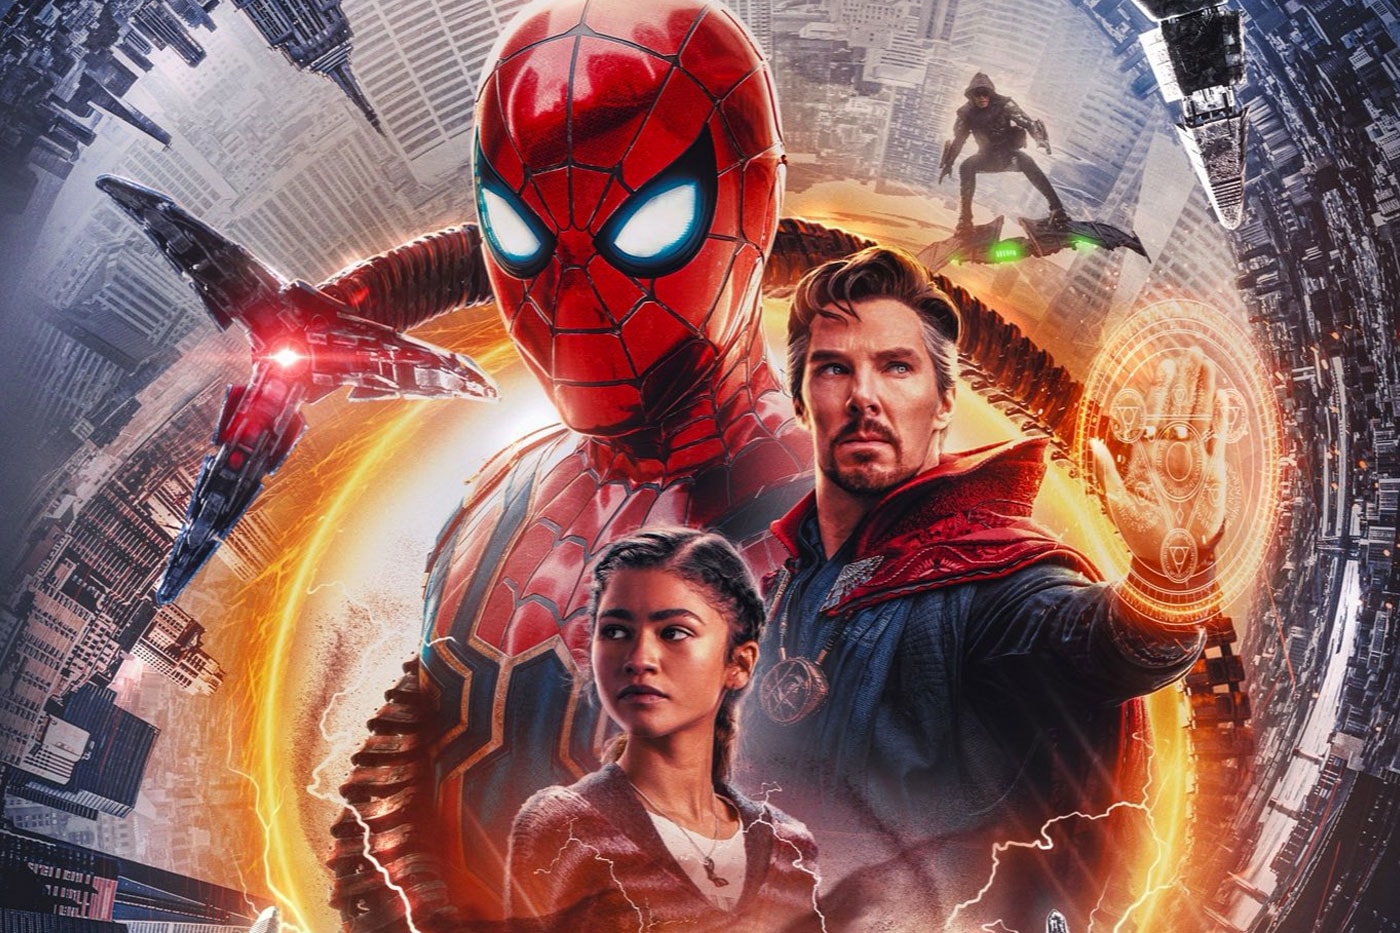 Spider-man: No Way Home Biggest Movie of 2021 Sony Pictures No 1 Info Marvel Studios Cinematic Universe 